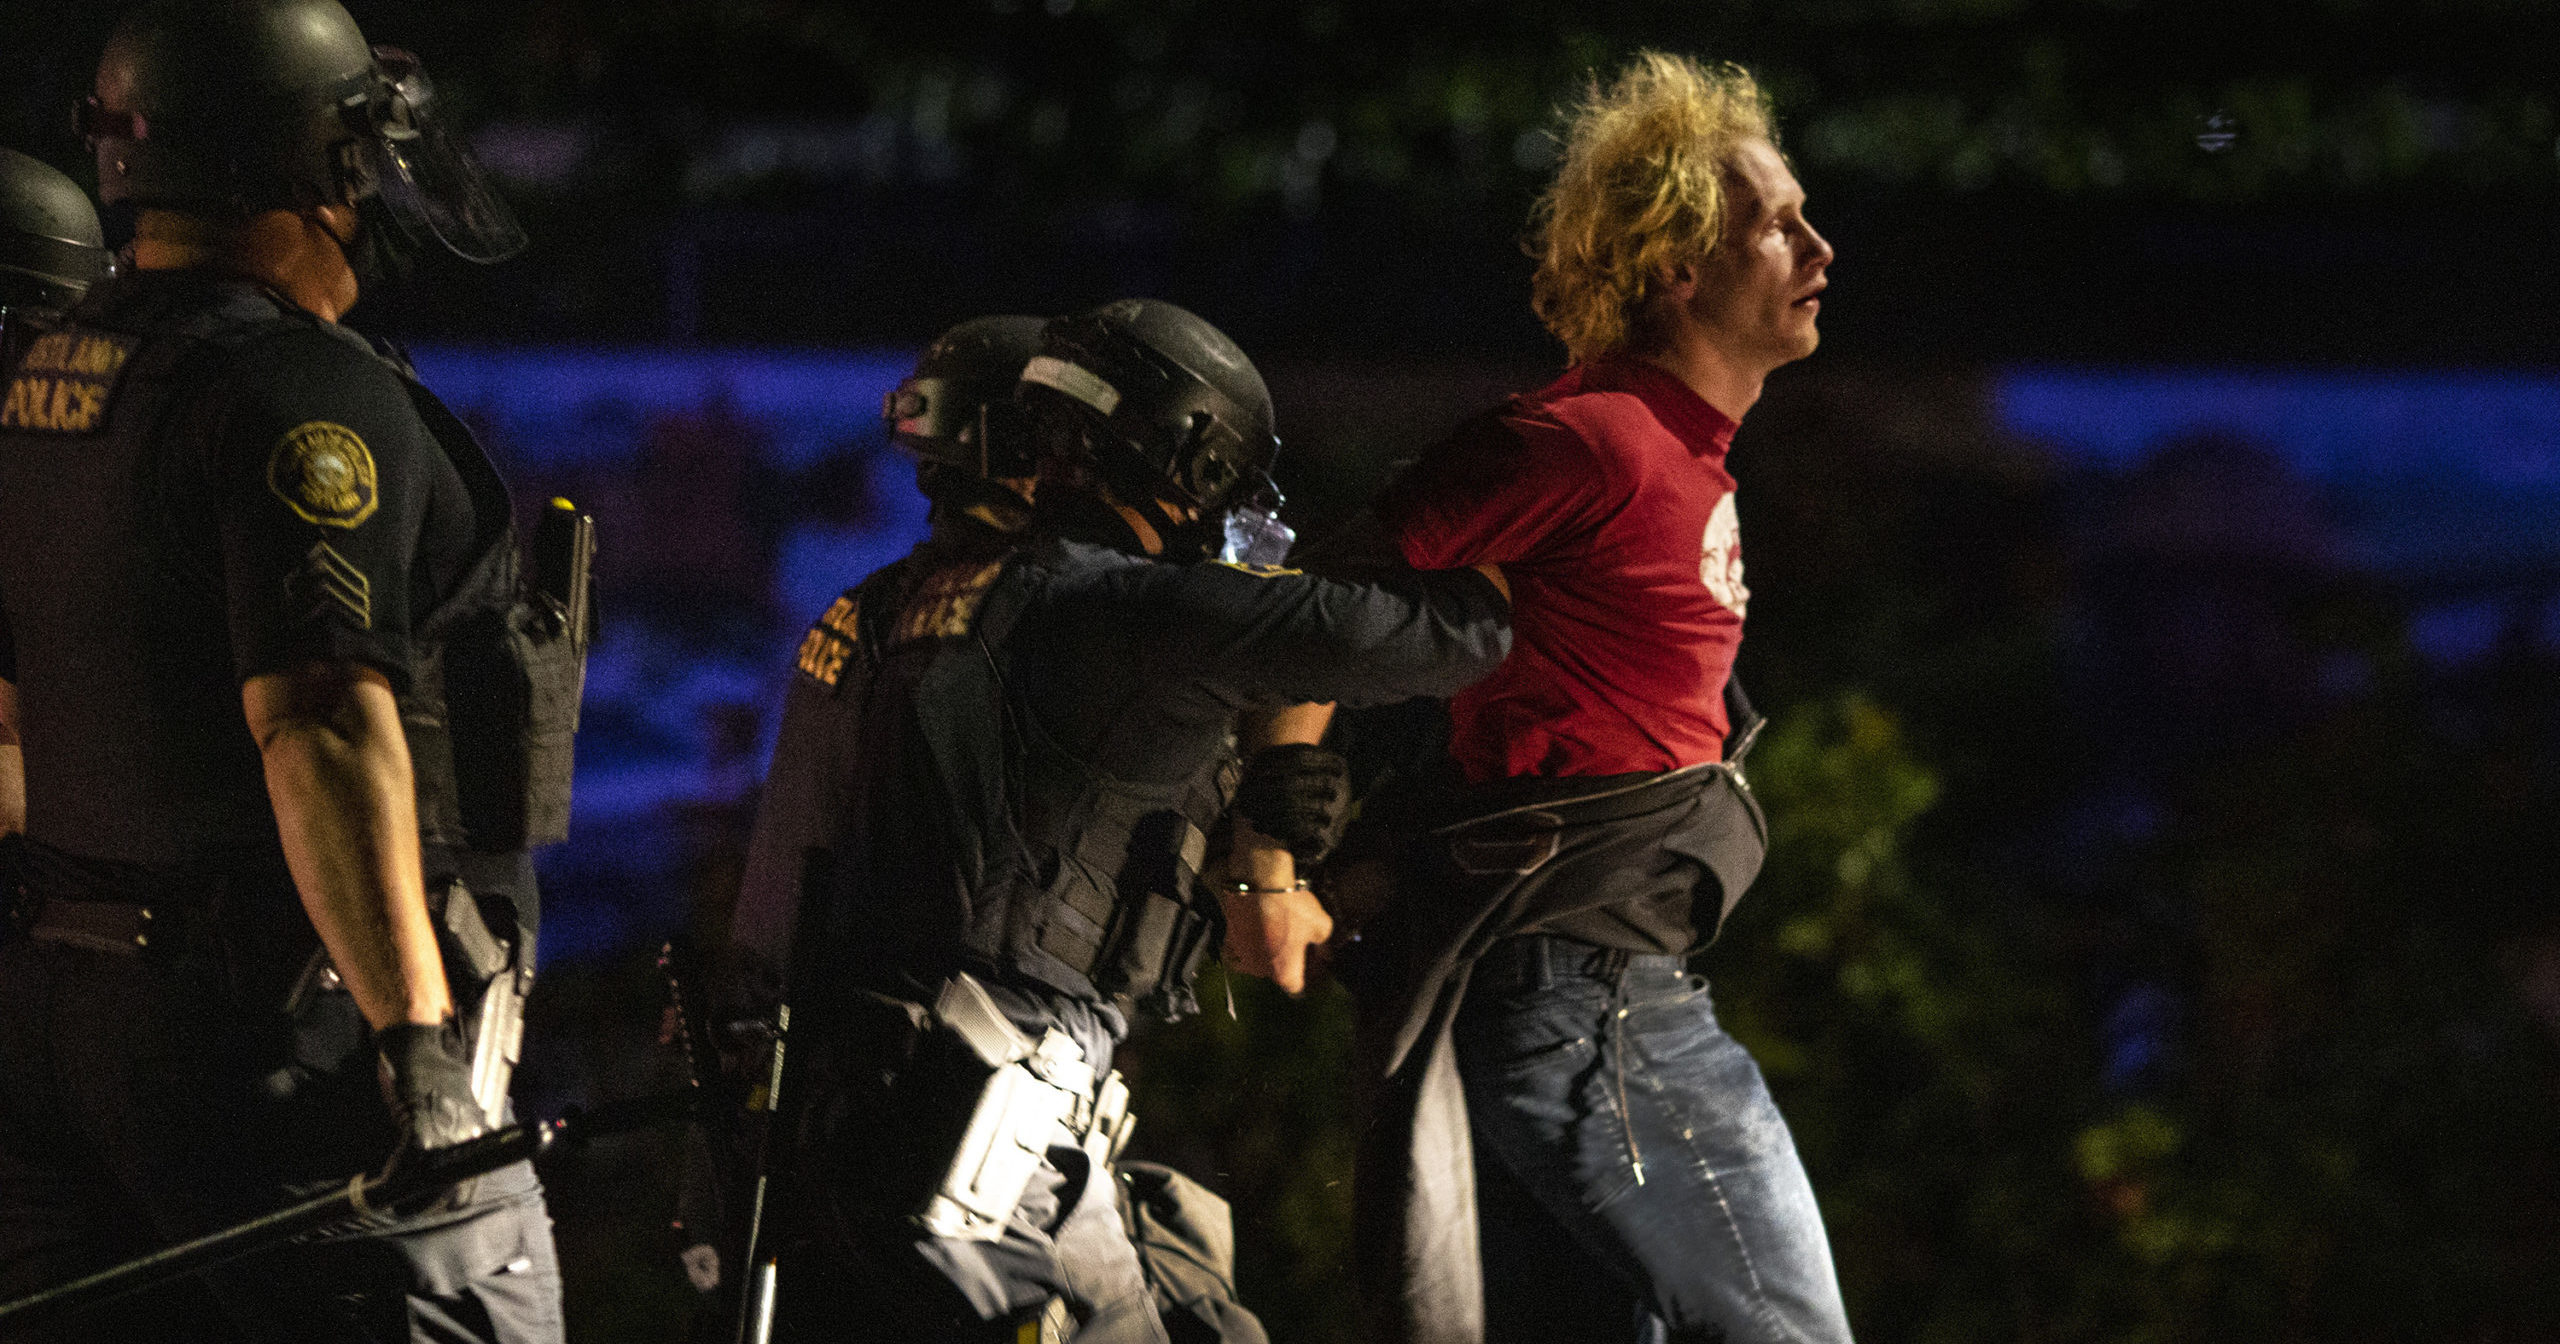 Police make arrests at the scene of a protest at a Portland police precinct in Portland, Oregon, on Aug. 30, 2020.